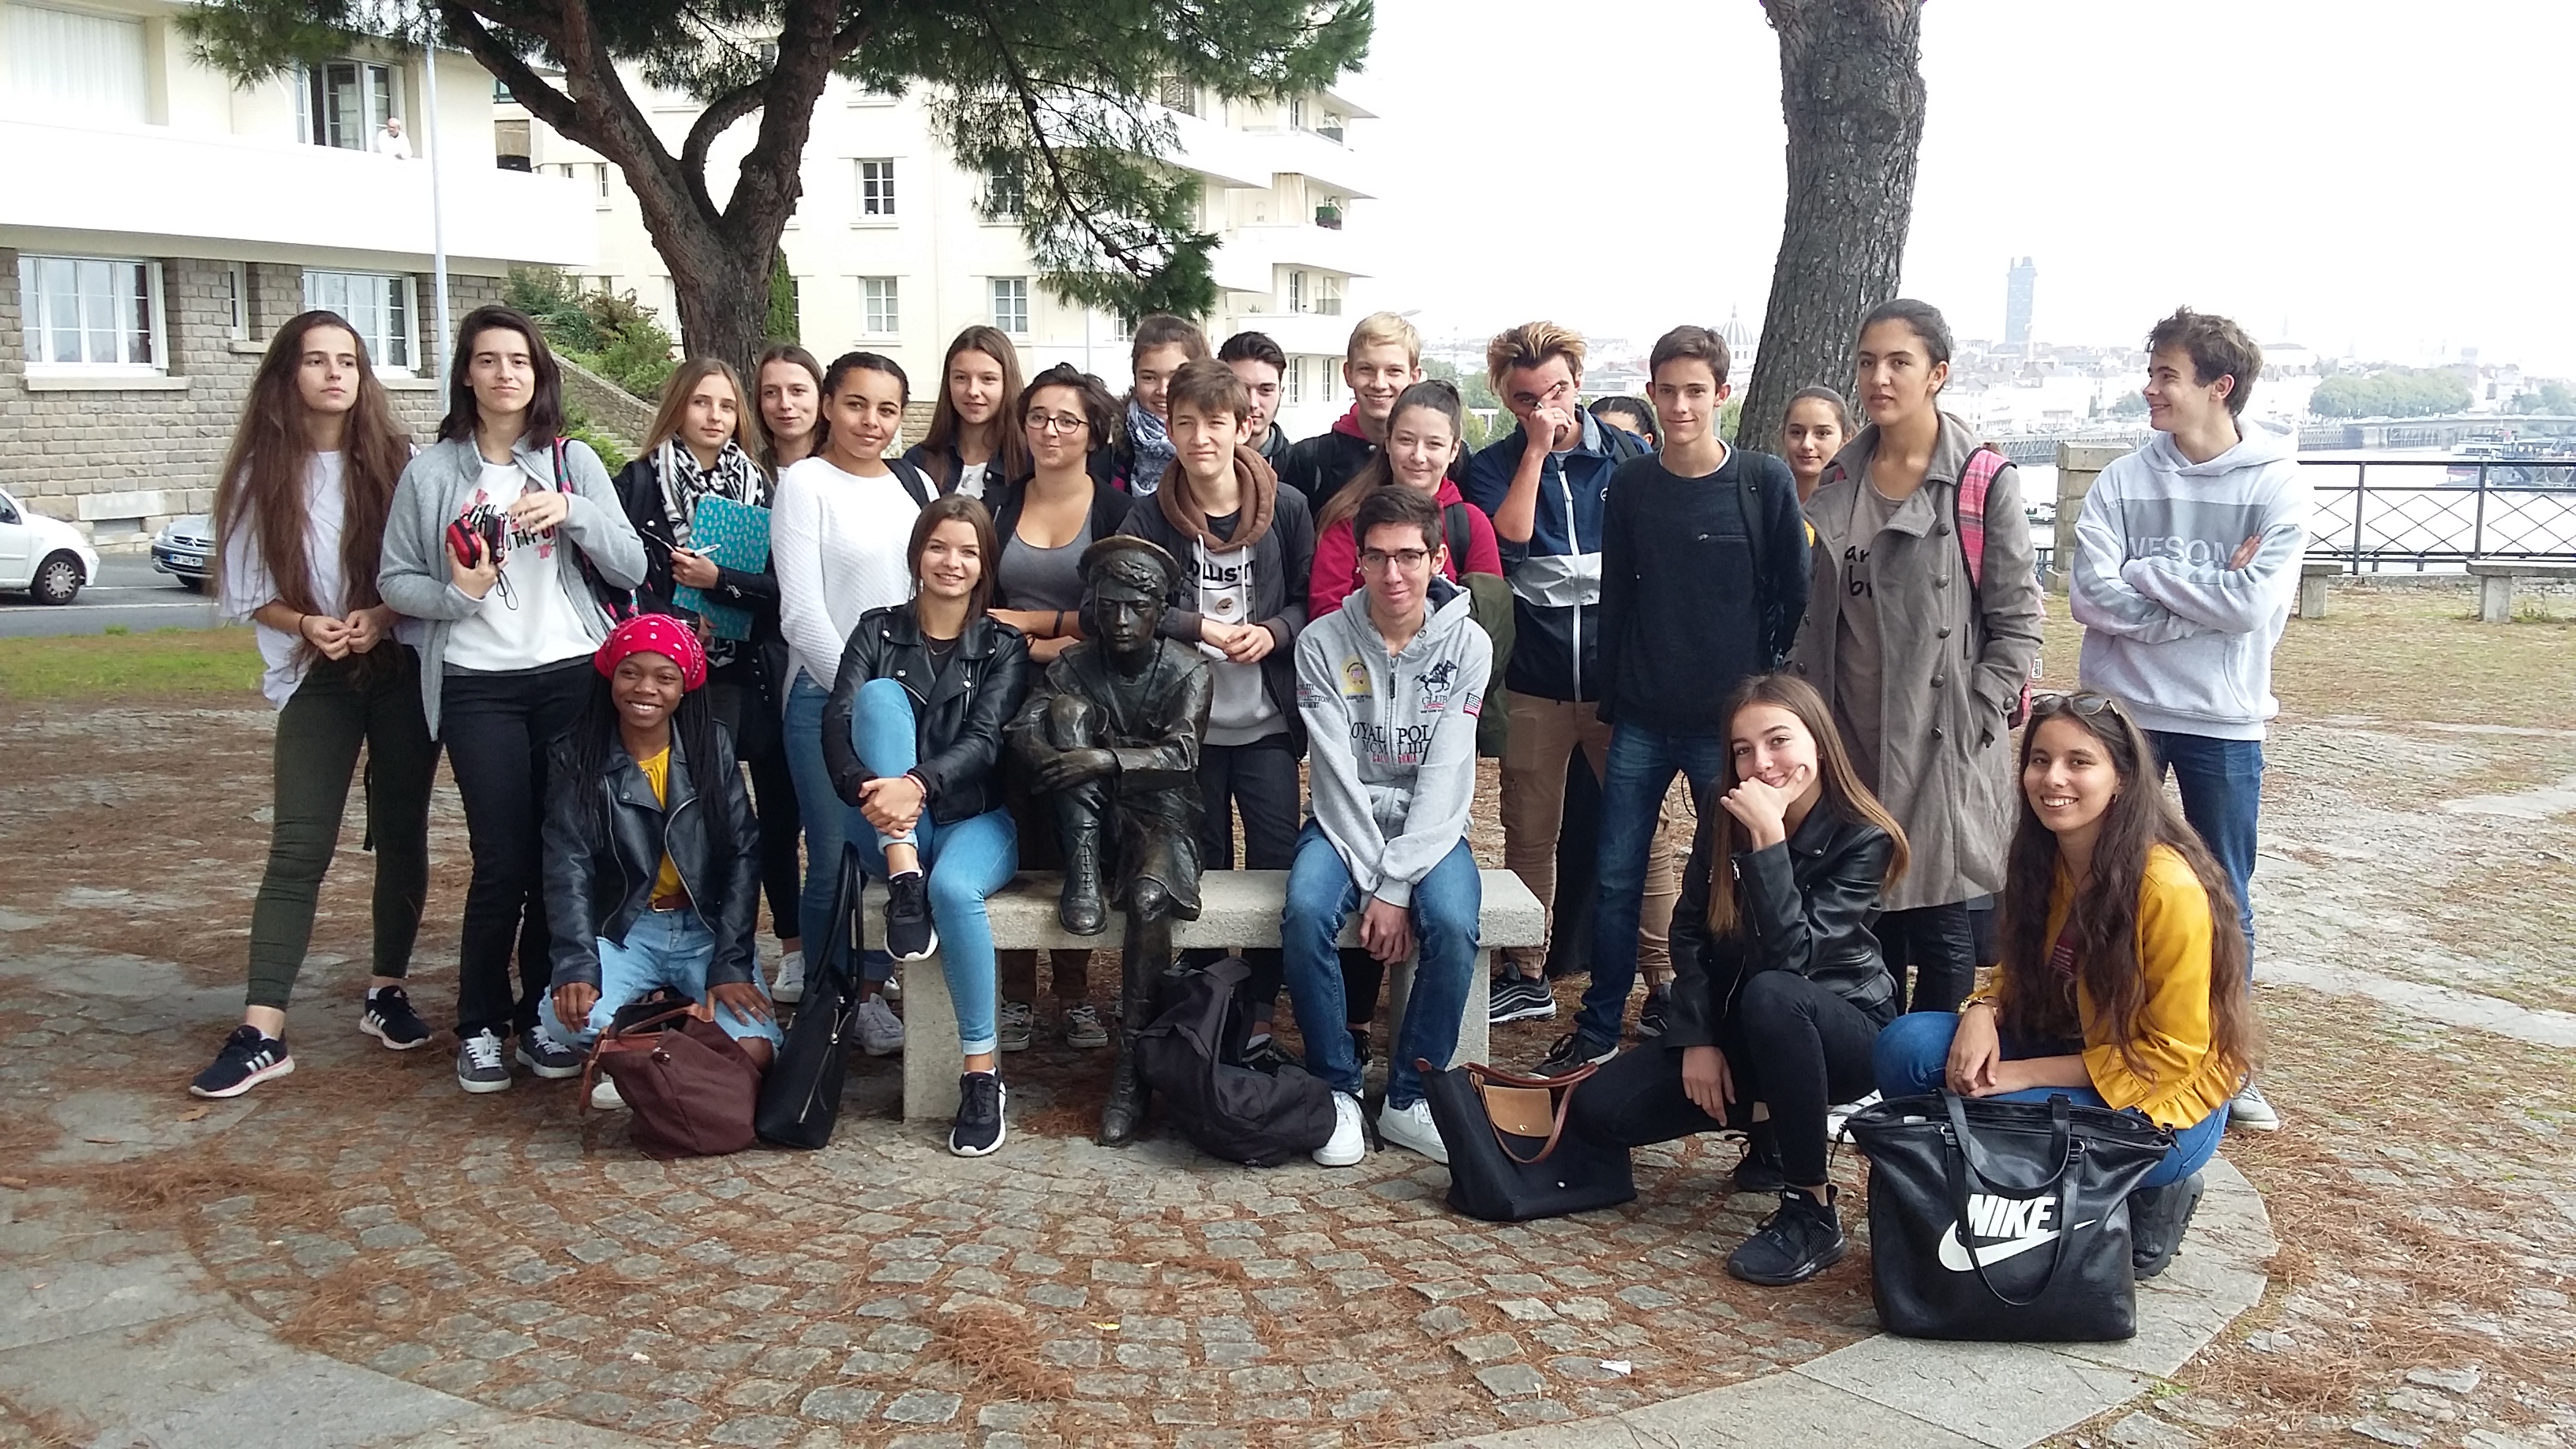 Literature And Society Class Visit To Jules Verne Museum In Nantes